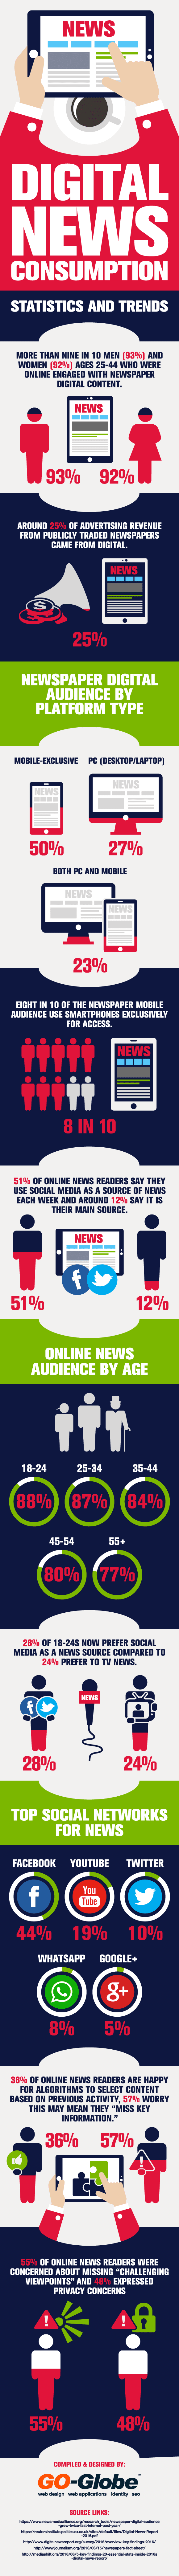 How Digital News Consumption is Shaping the Future of Advertising - #Infographic